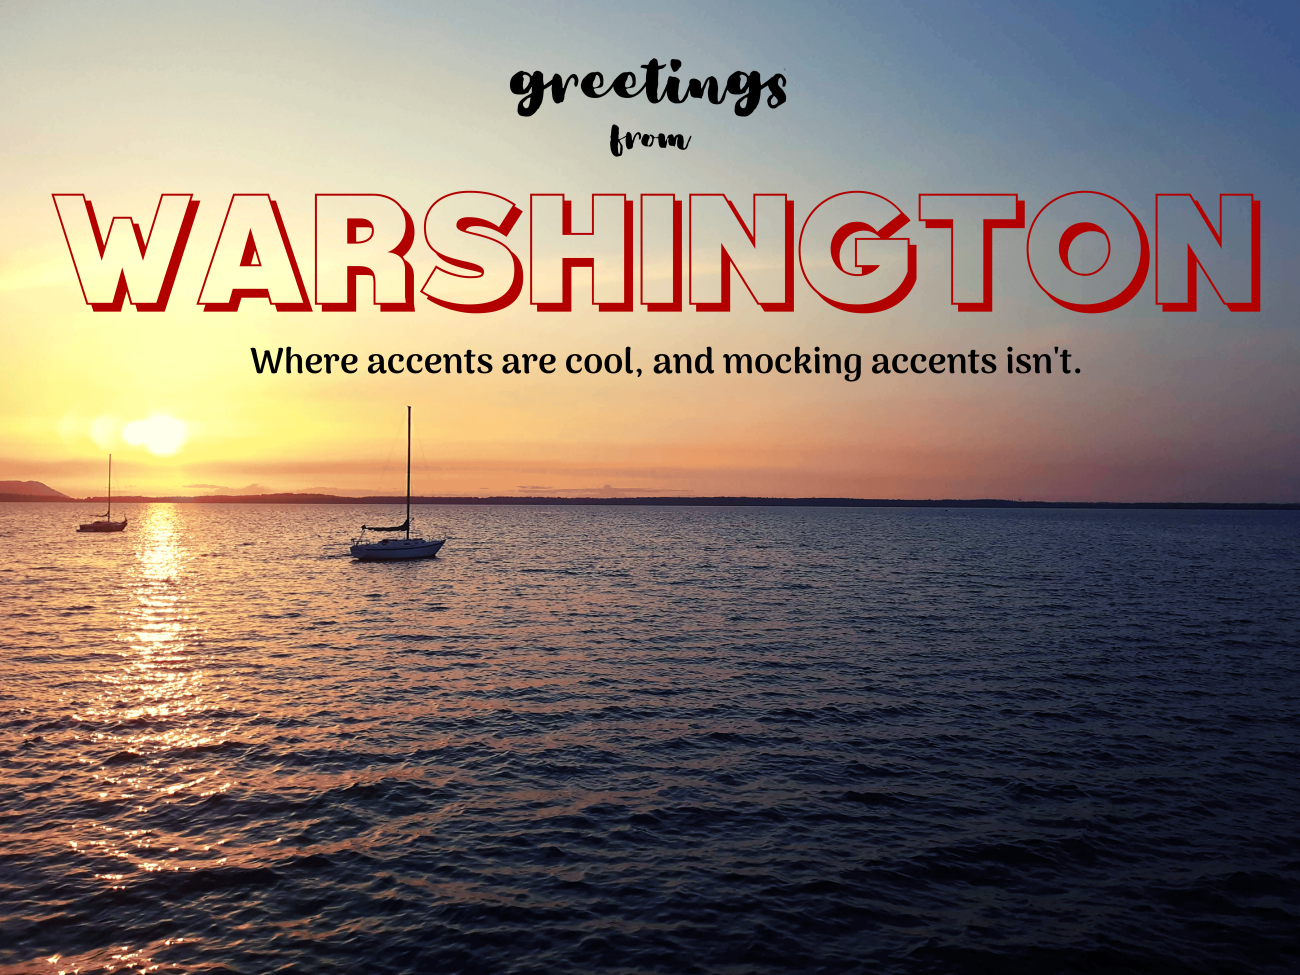 Linguistics Poster. Greetings from Washington (Warshington). See webpage for full description.